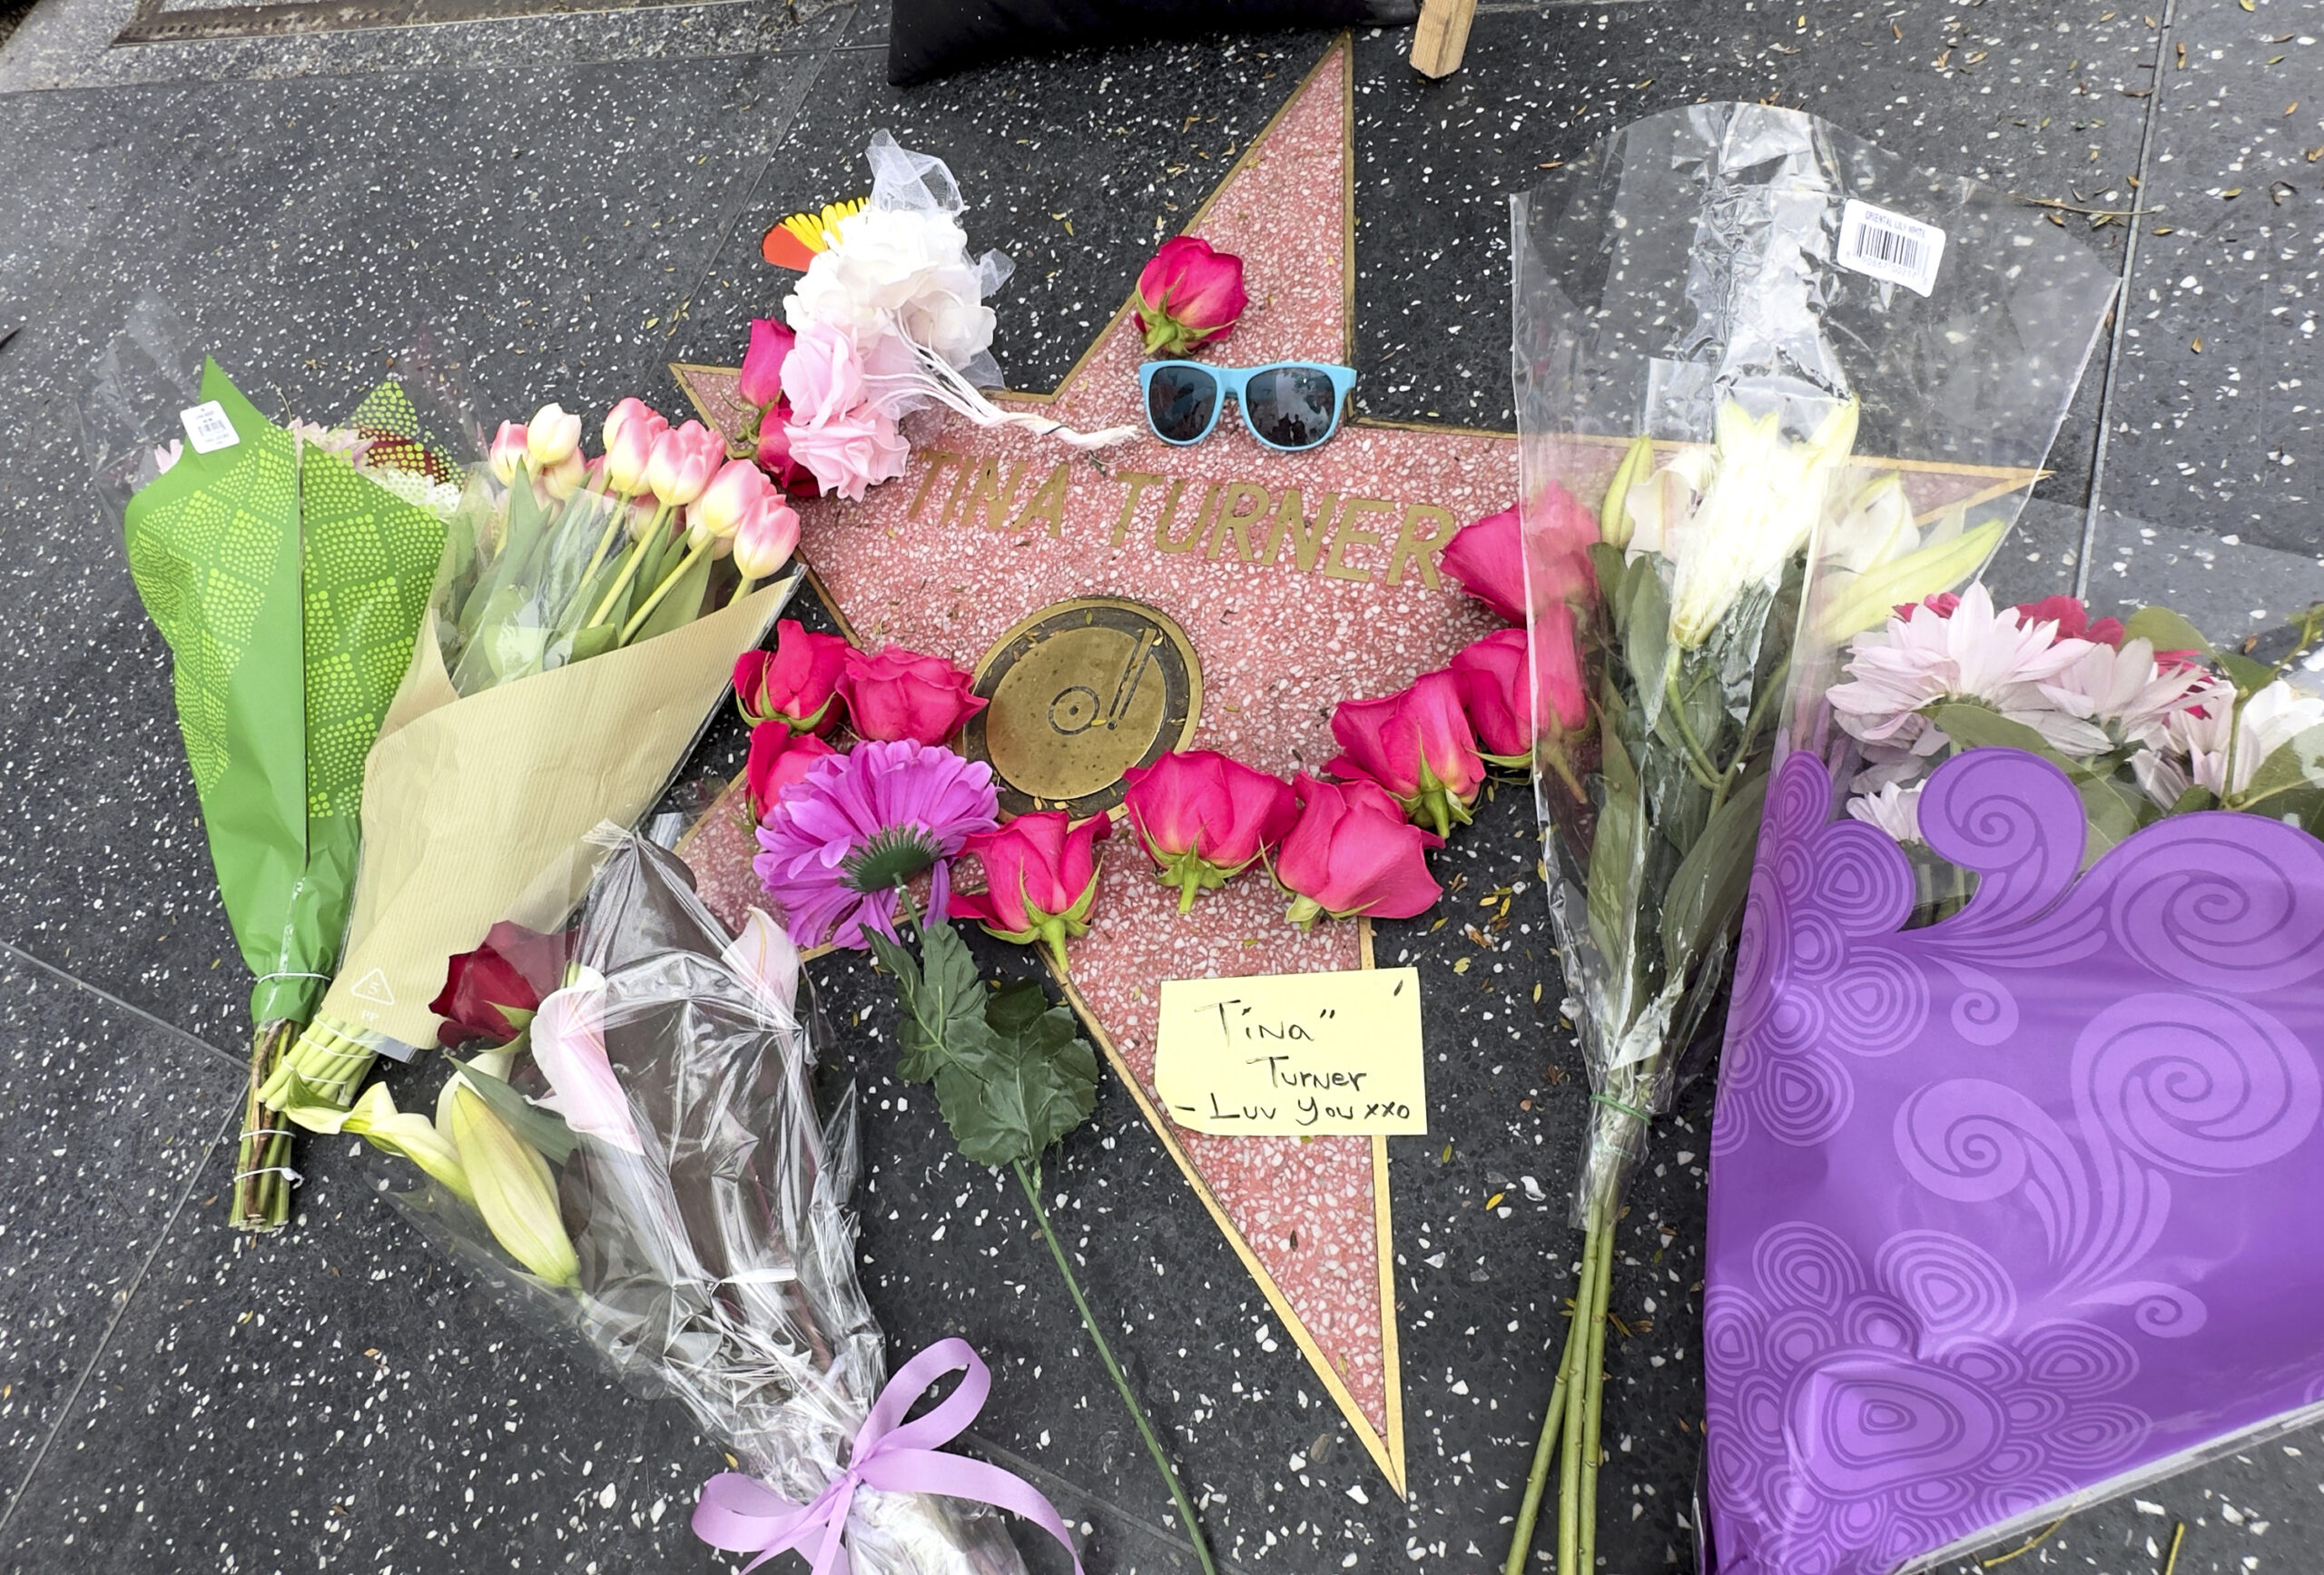 Flowers and tributes appear on Tina Turner's star on the Hollywood Walk of Fame on Wednesday, May 24, 2023, in Los Angeles. Turner, the unstoppable singer and stage performer with hits like "What's Love Got to Do With It," died Tuesday after a long illness at her home in Küsnacht near Zurich, Switzerland, according to her manager. She was 83. Photo credit: Rick Taber, The Associated Press